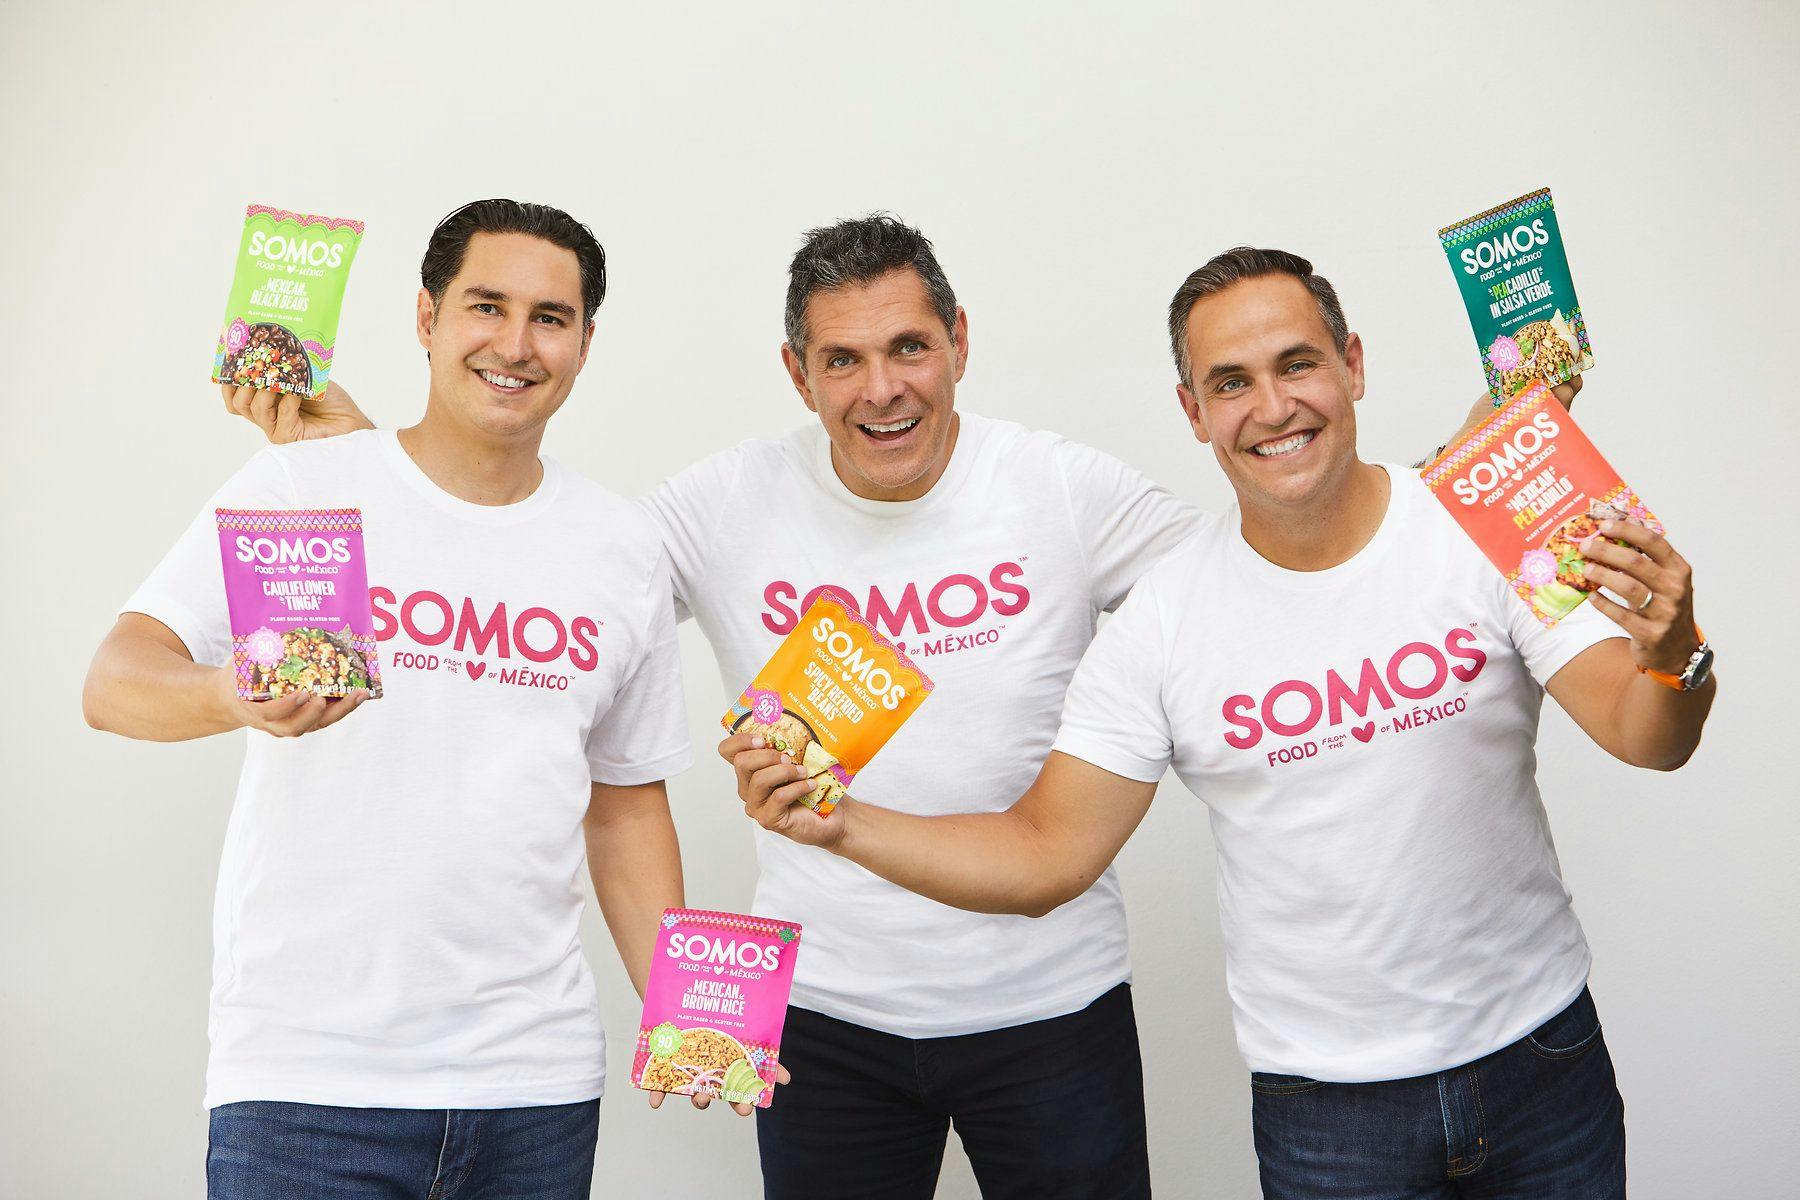 Three men wearing branded T-shirts holding up Somos products